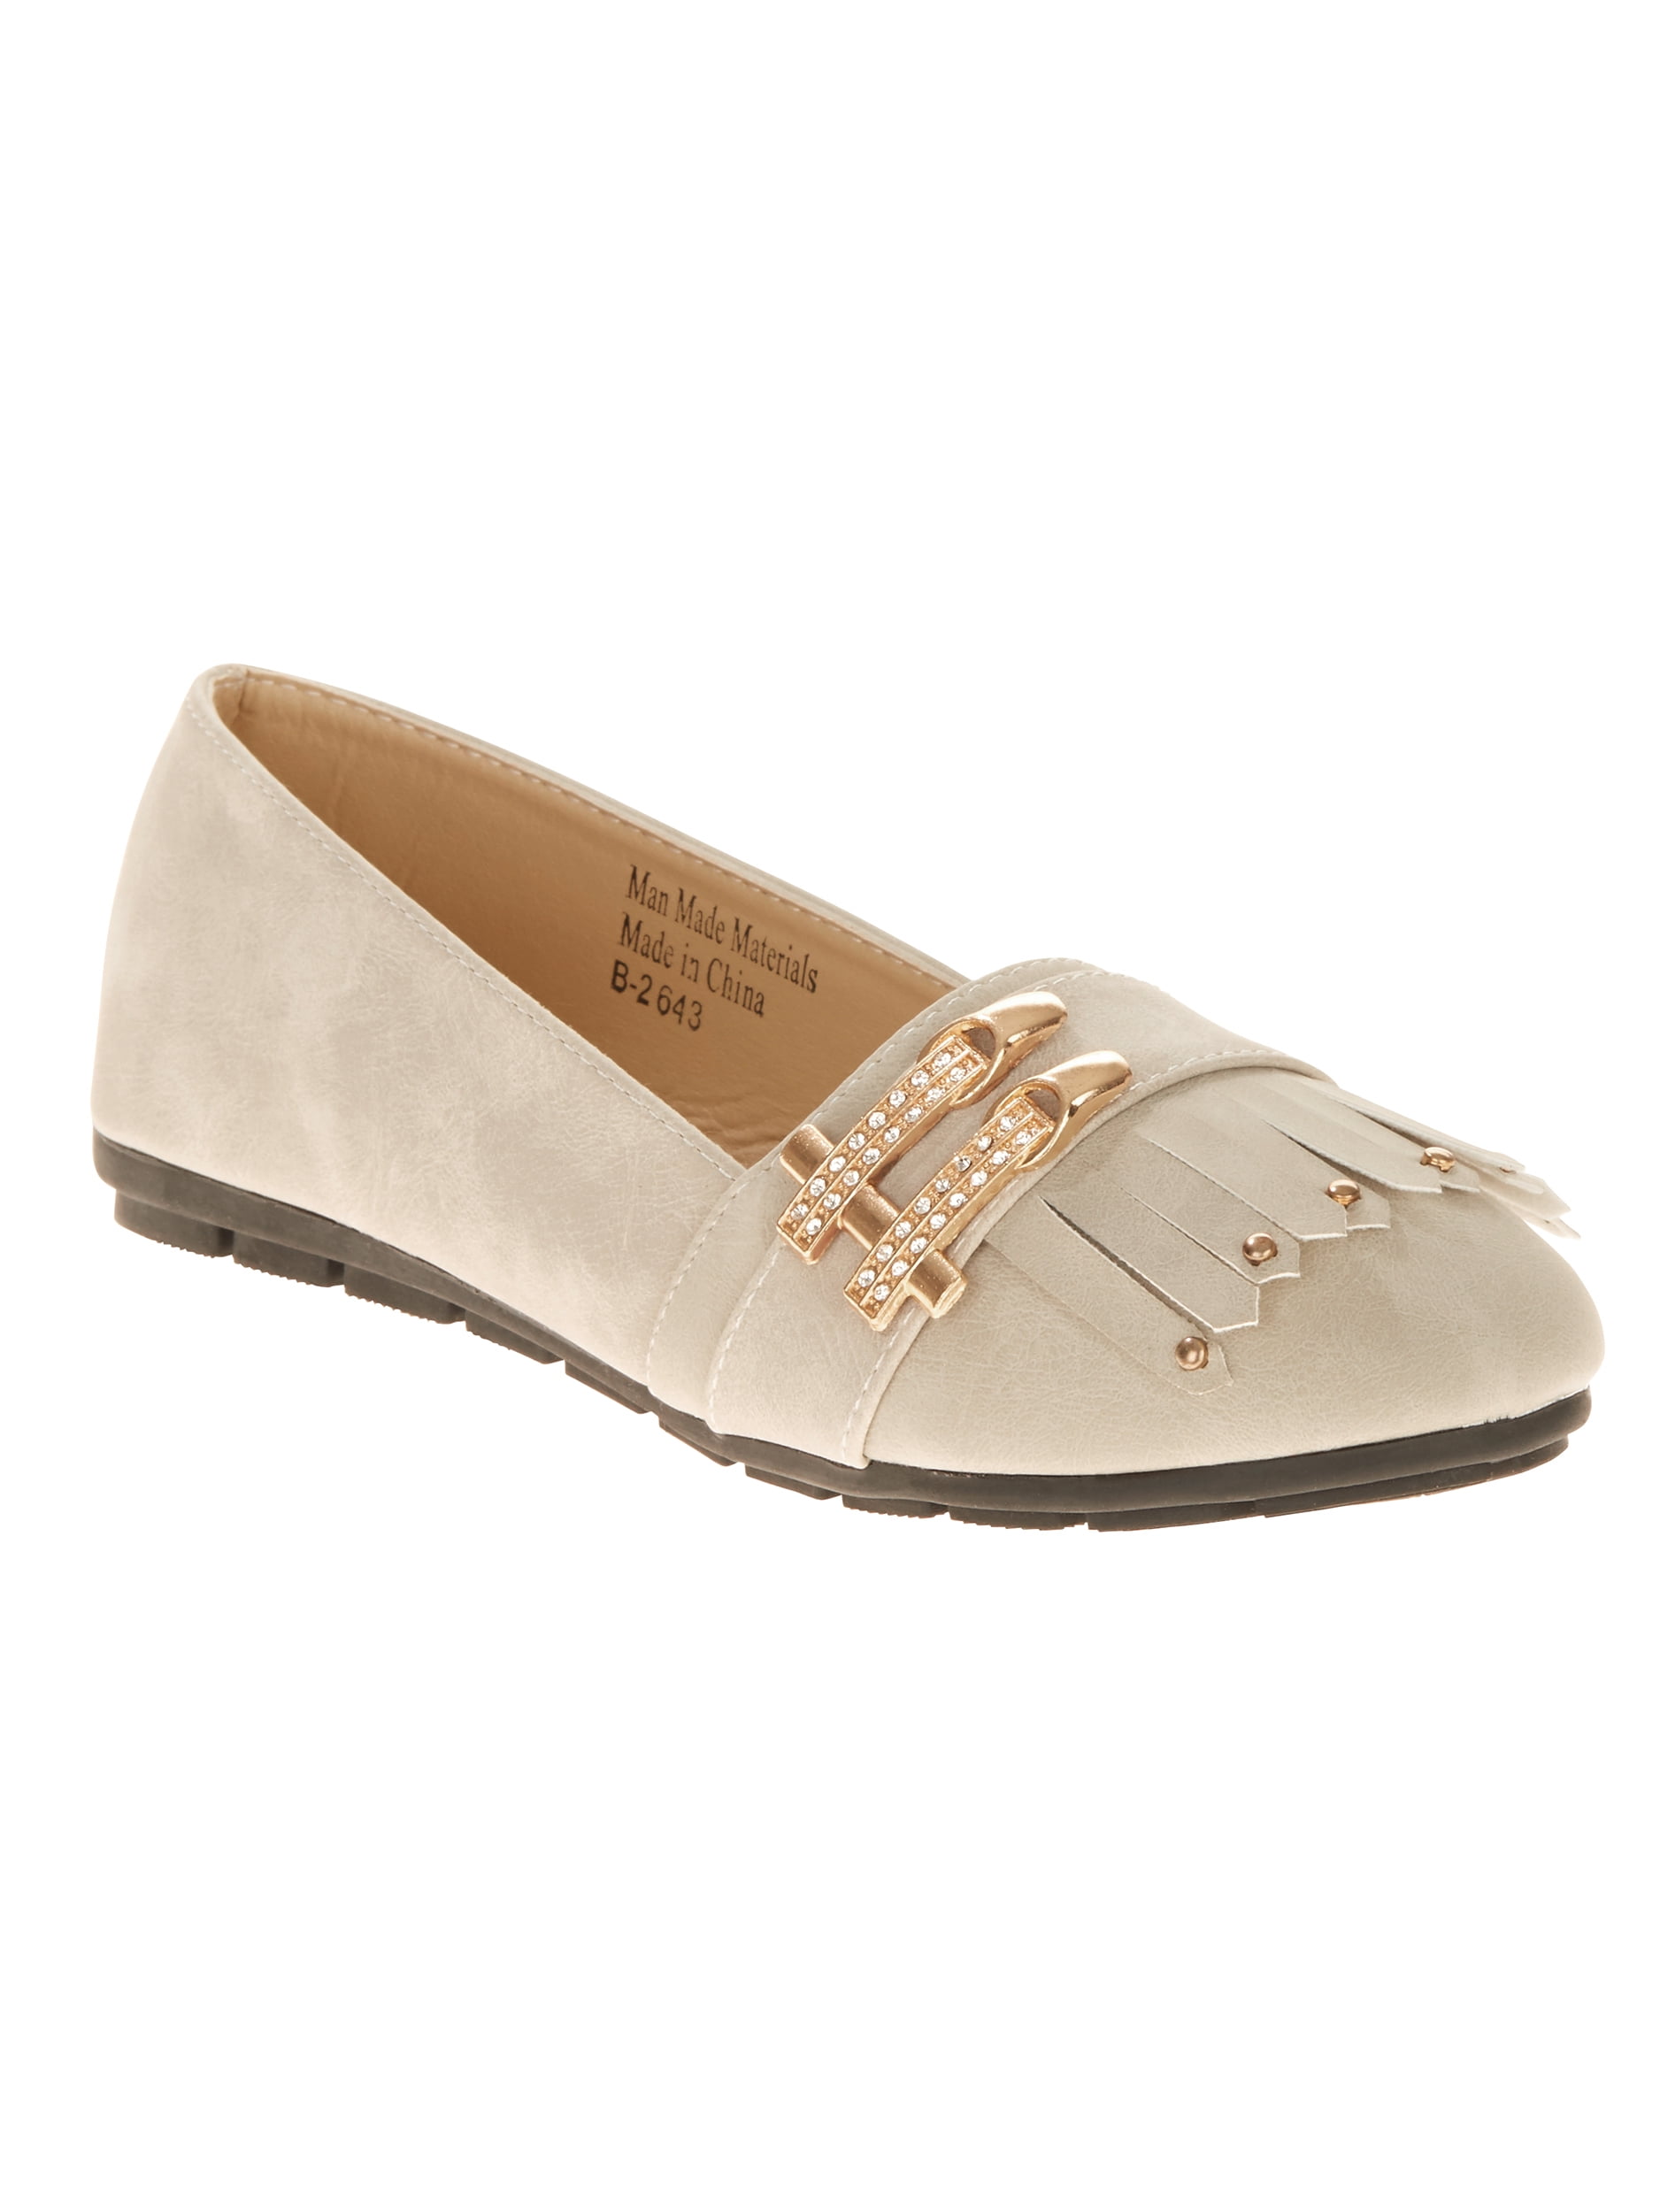 Victoria K Womens Soft Textured Material With Side Buckle Ornament And Fringes Ballerina Flats